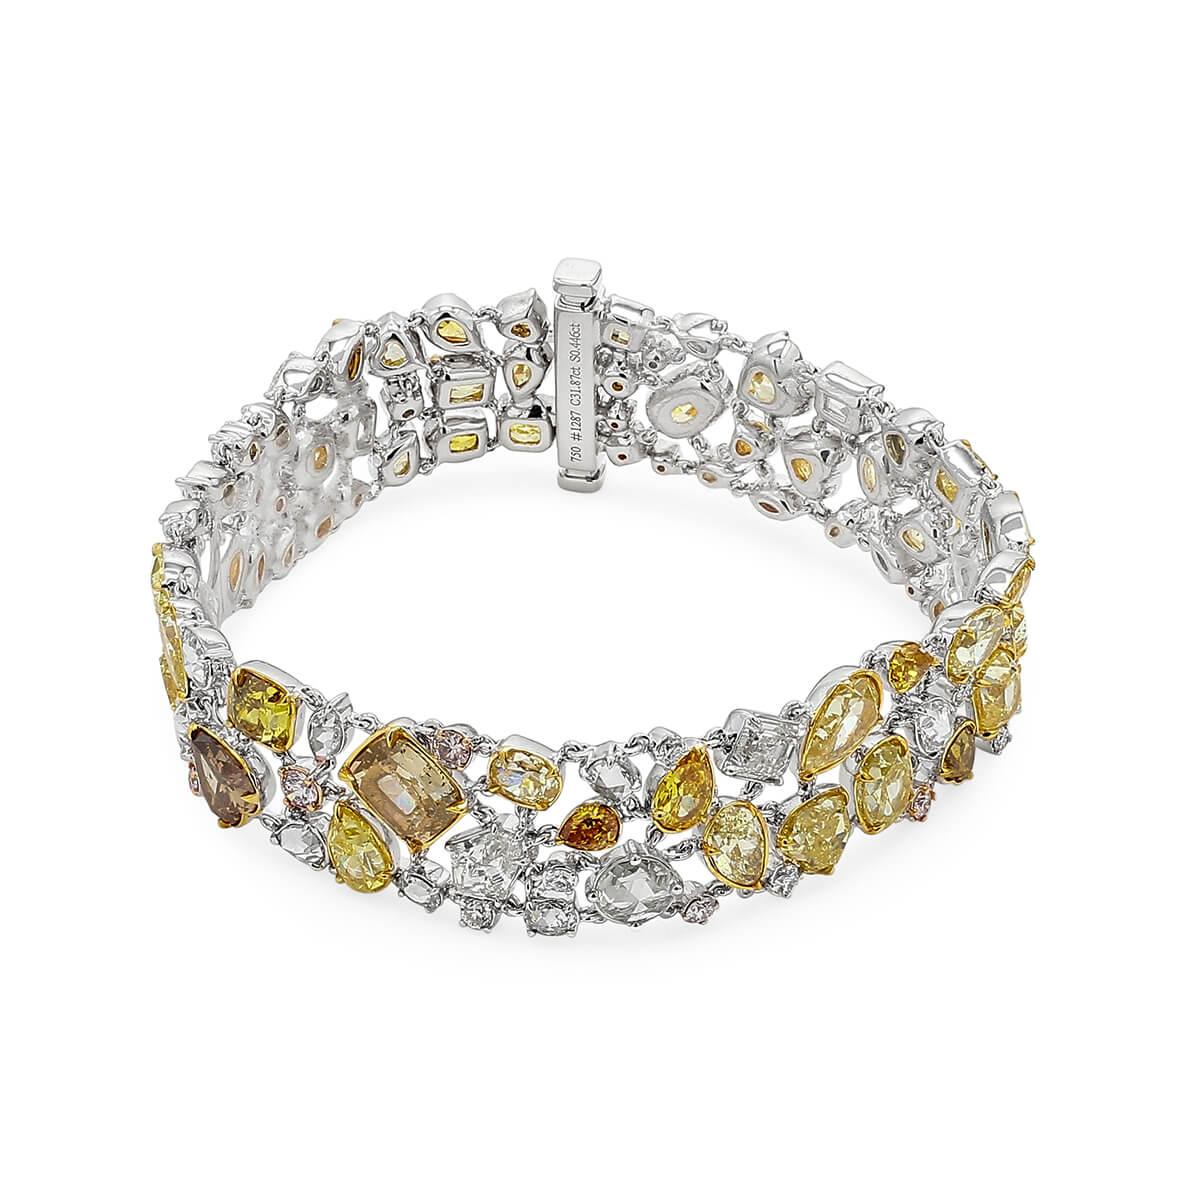 This one of a kind piece is made from natural untreated yellow and white diamonds, perfectly placed in a variety of shapes. Elegant and sophisticated with a bit of colour to stand out. This piece has been expertly crafted using 18 Karat White Gold.